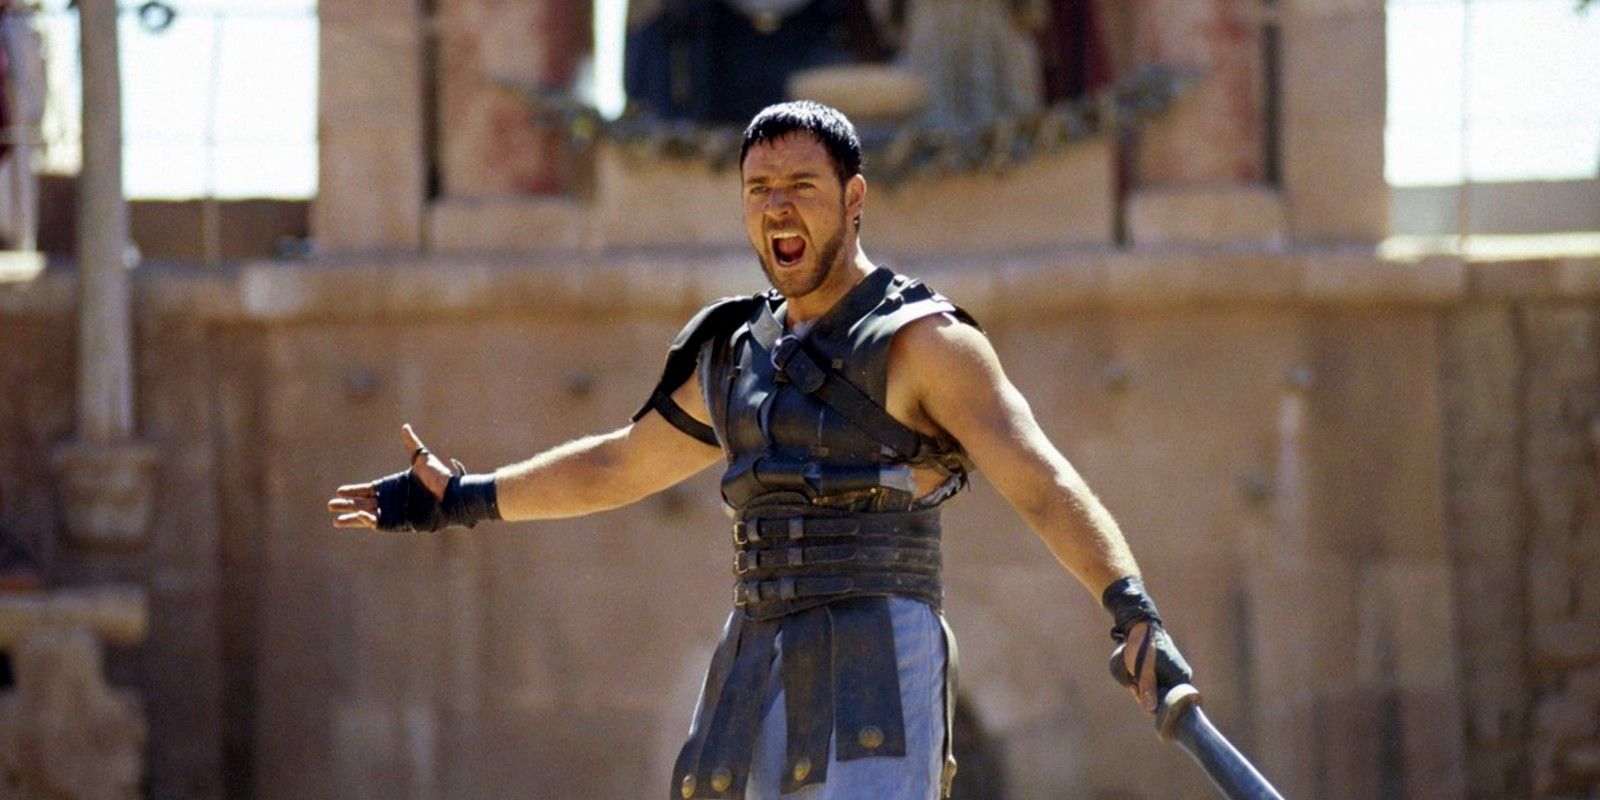 Maximus asking &quot;Are you not entertained?&quot; in the arena in Gladiator